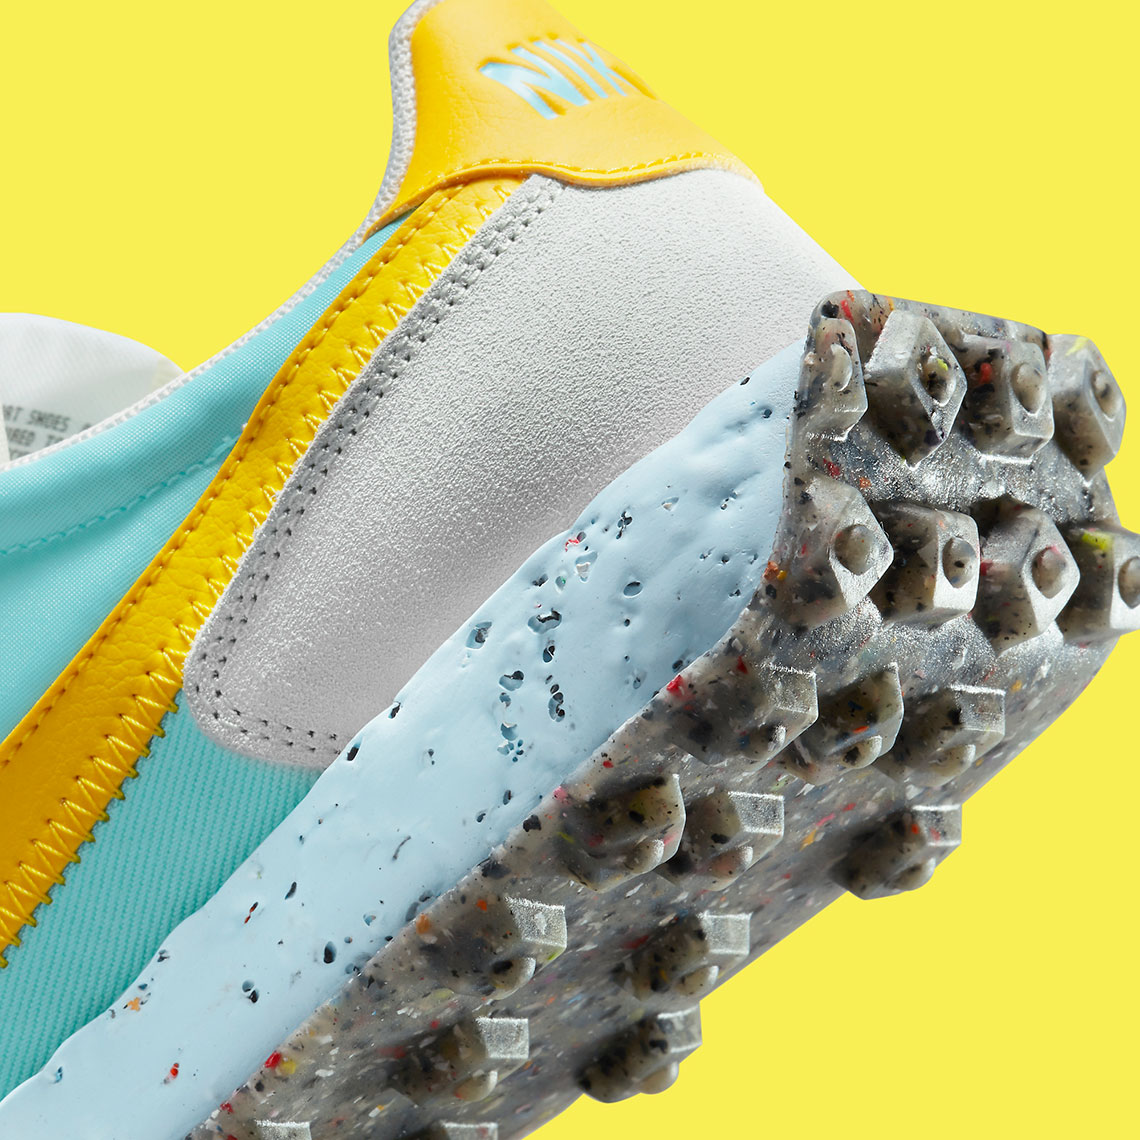 Nike Waffle Racer Crater Wmns Bleached Aqua Sail Photon Dust Speed Yellow Ct1983 400 4